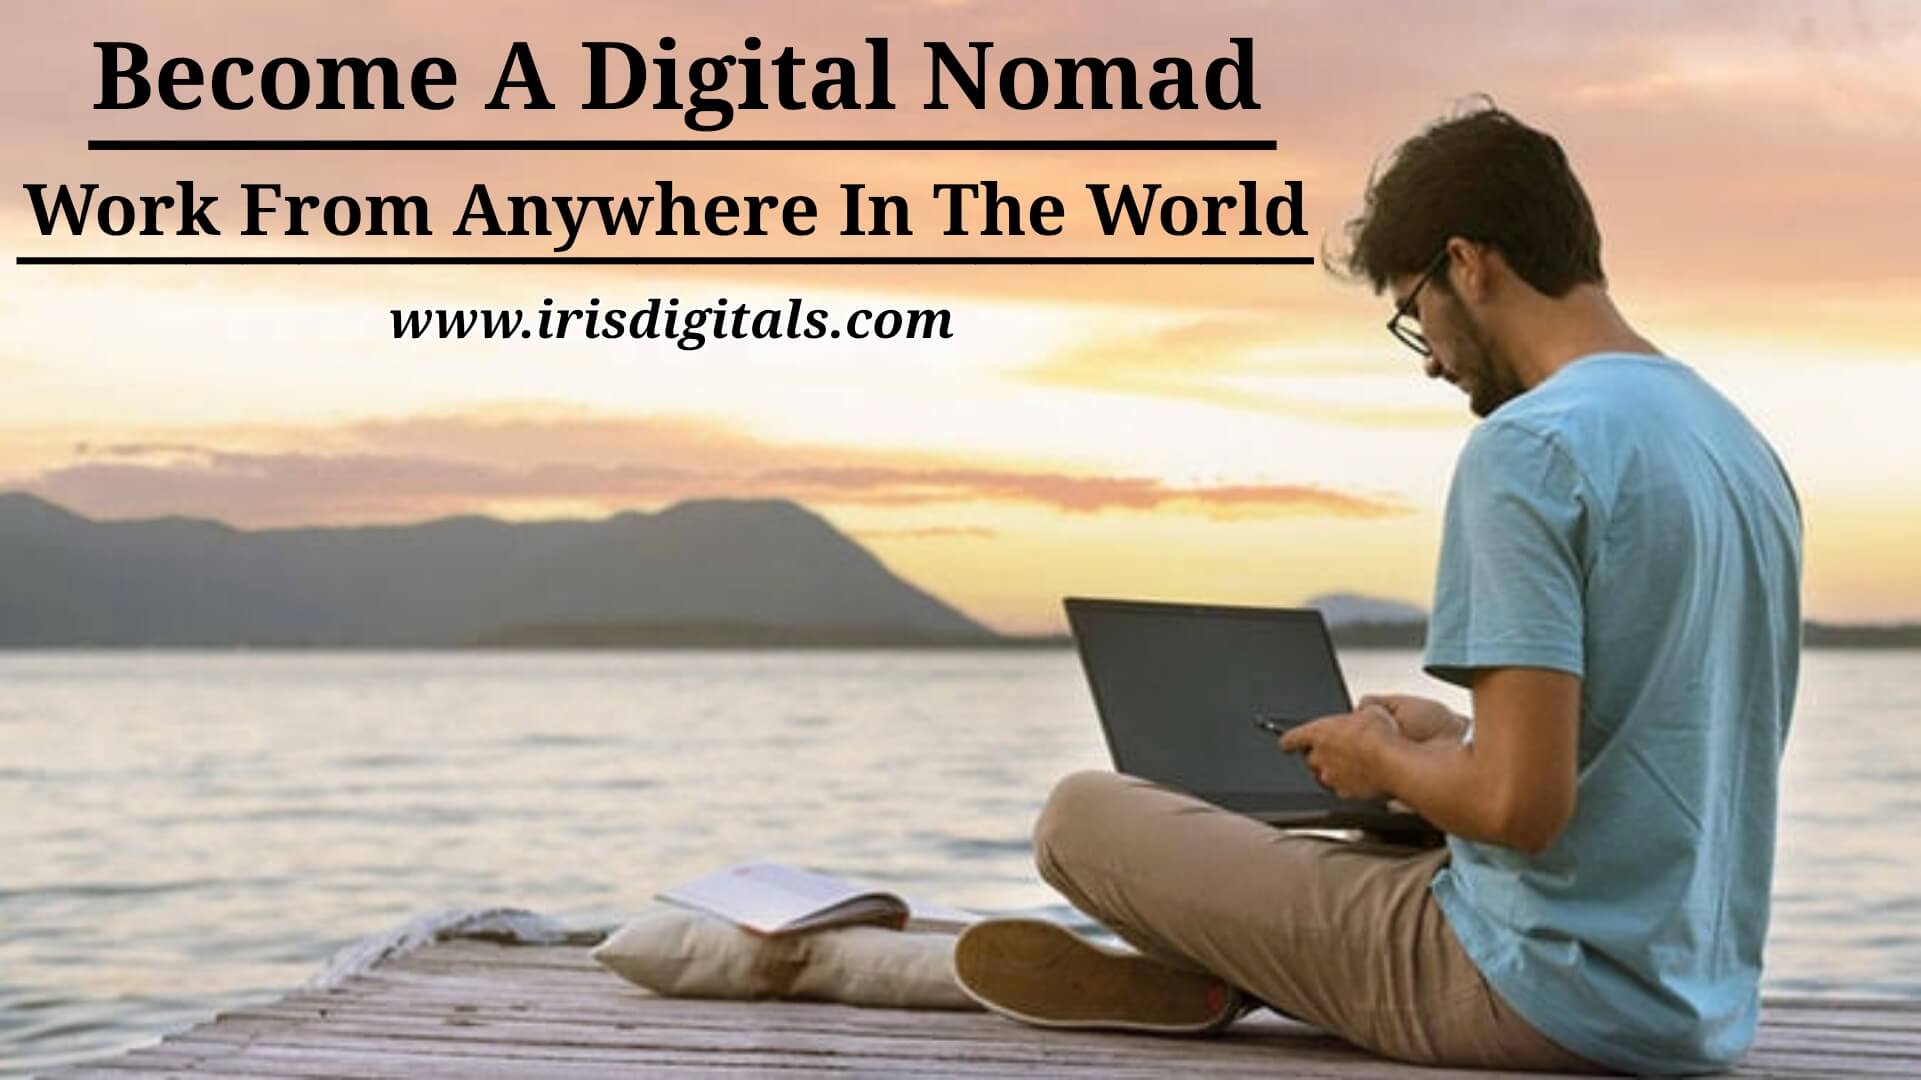 Become a Digital Nomad: Work From Anywhere In The World